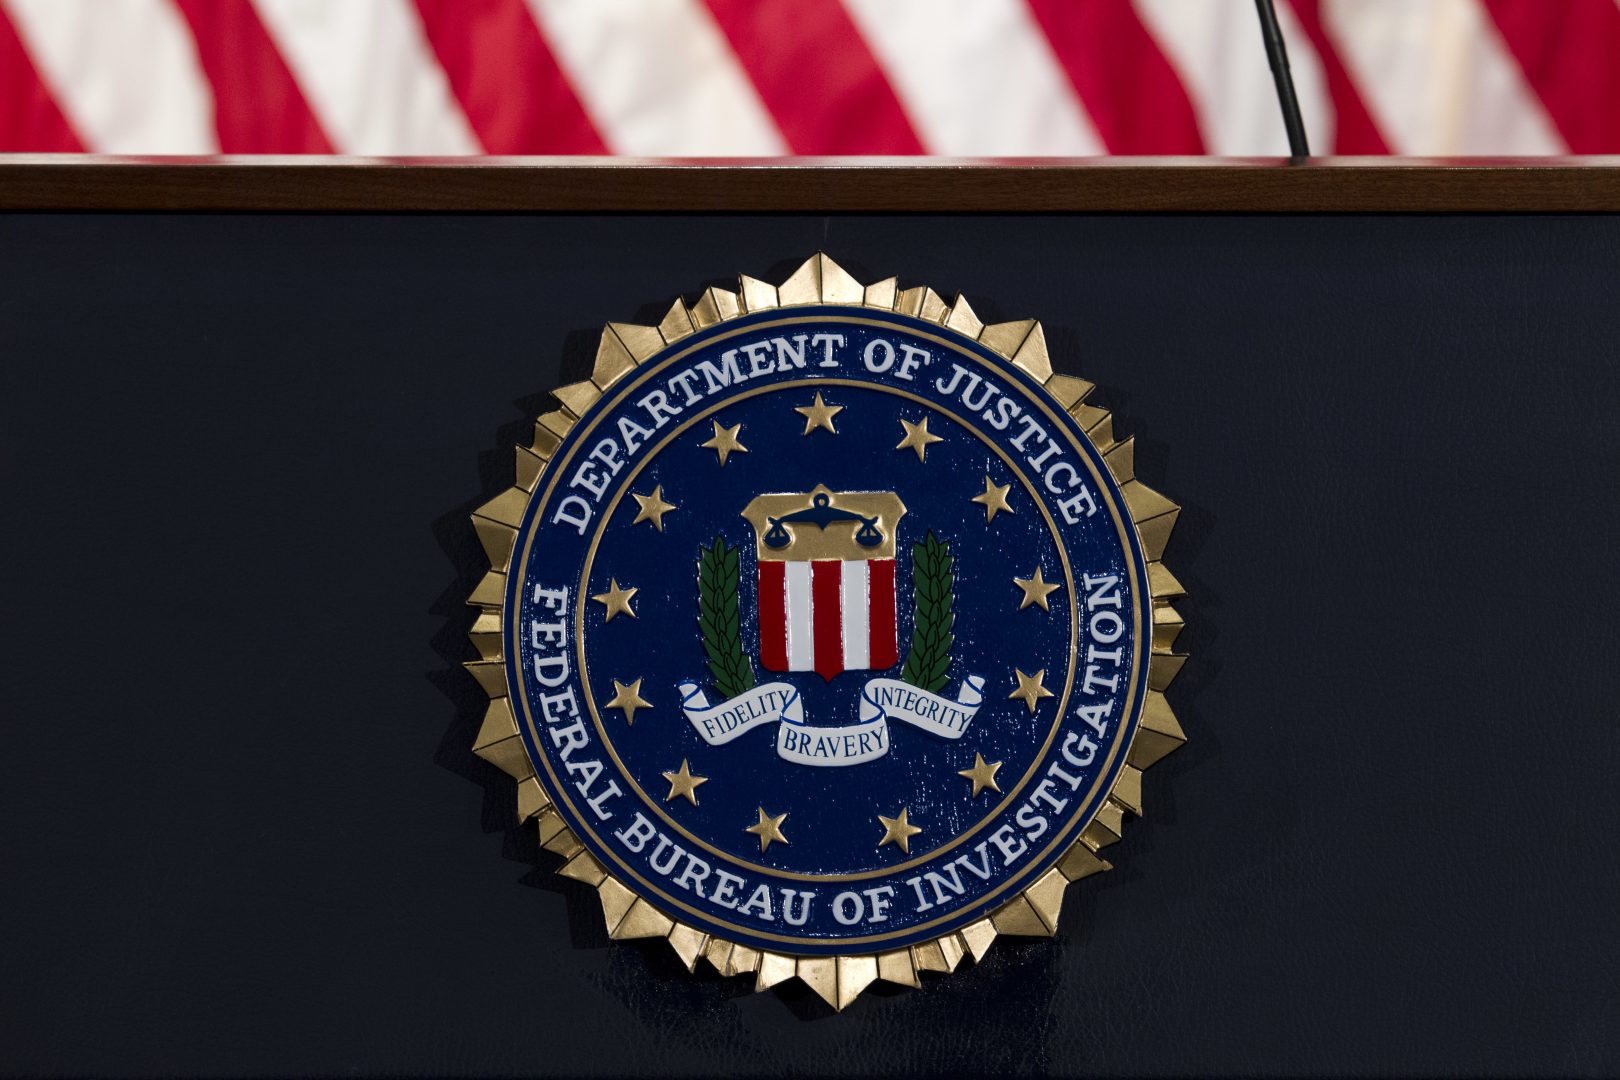 FILE PHOTO: The FBI seal is seen before a news conference at FBI headquarters in Washington on June 14, 2018.